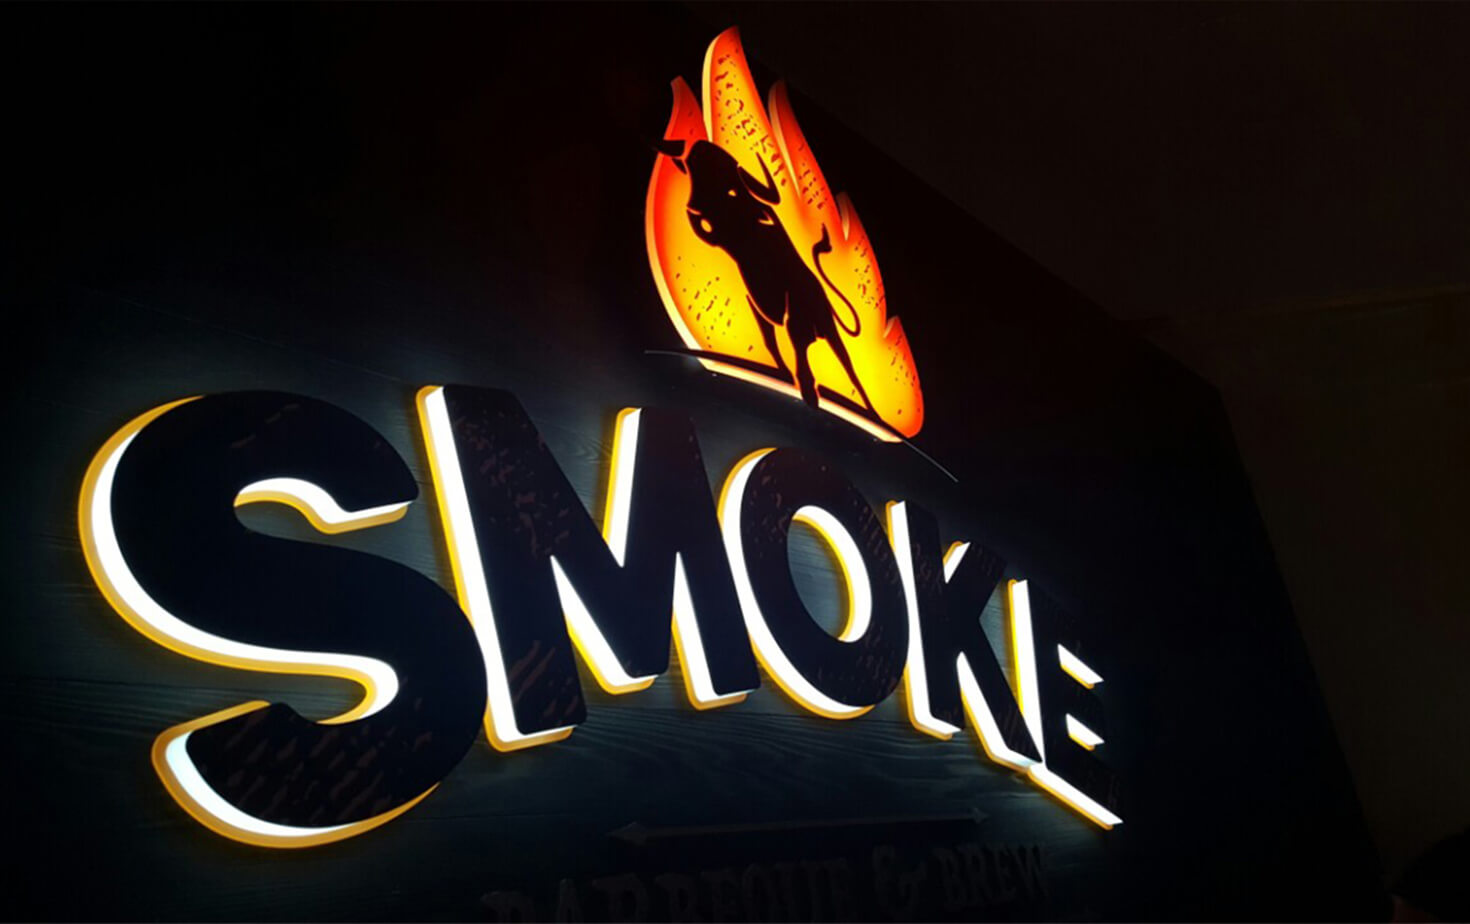 Shooting Star Casino Smoke Interior Wall Sign Dynamic LED logo cabinet and dual edge lit Routed Letters